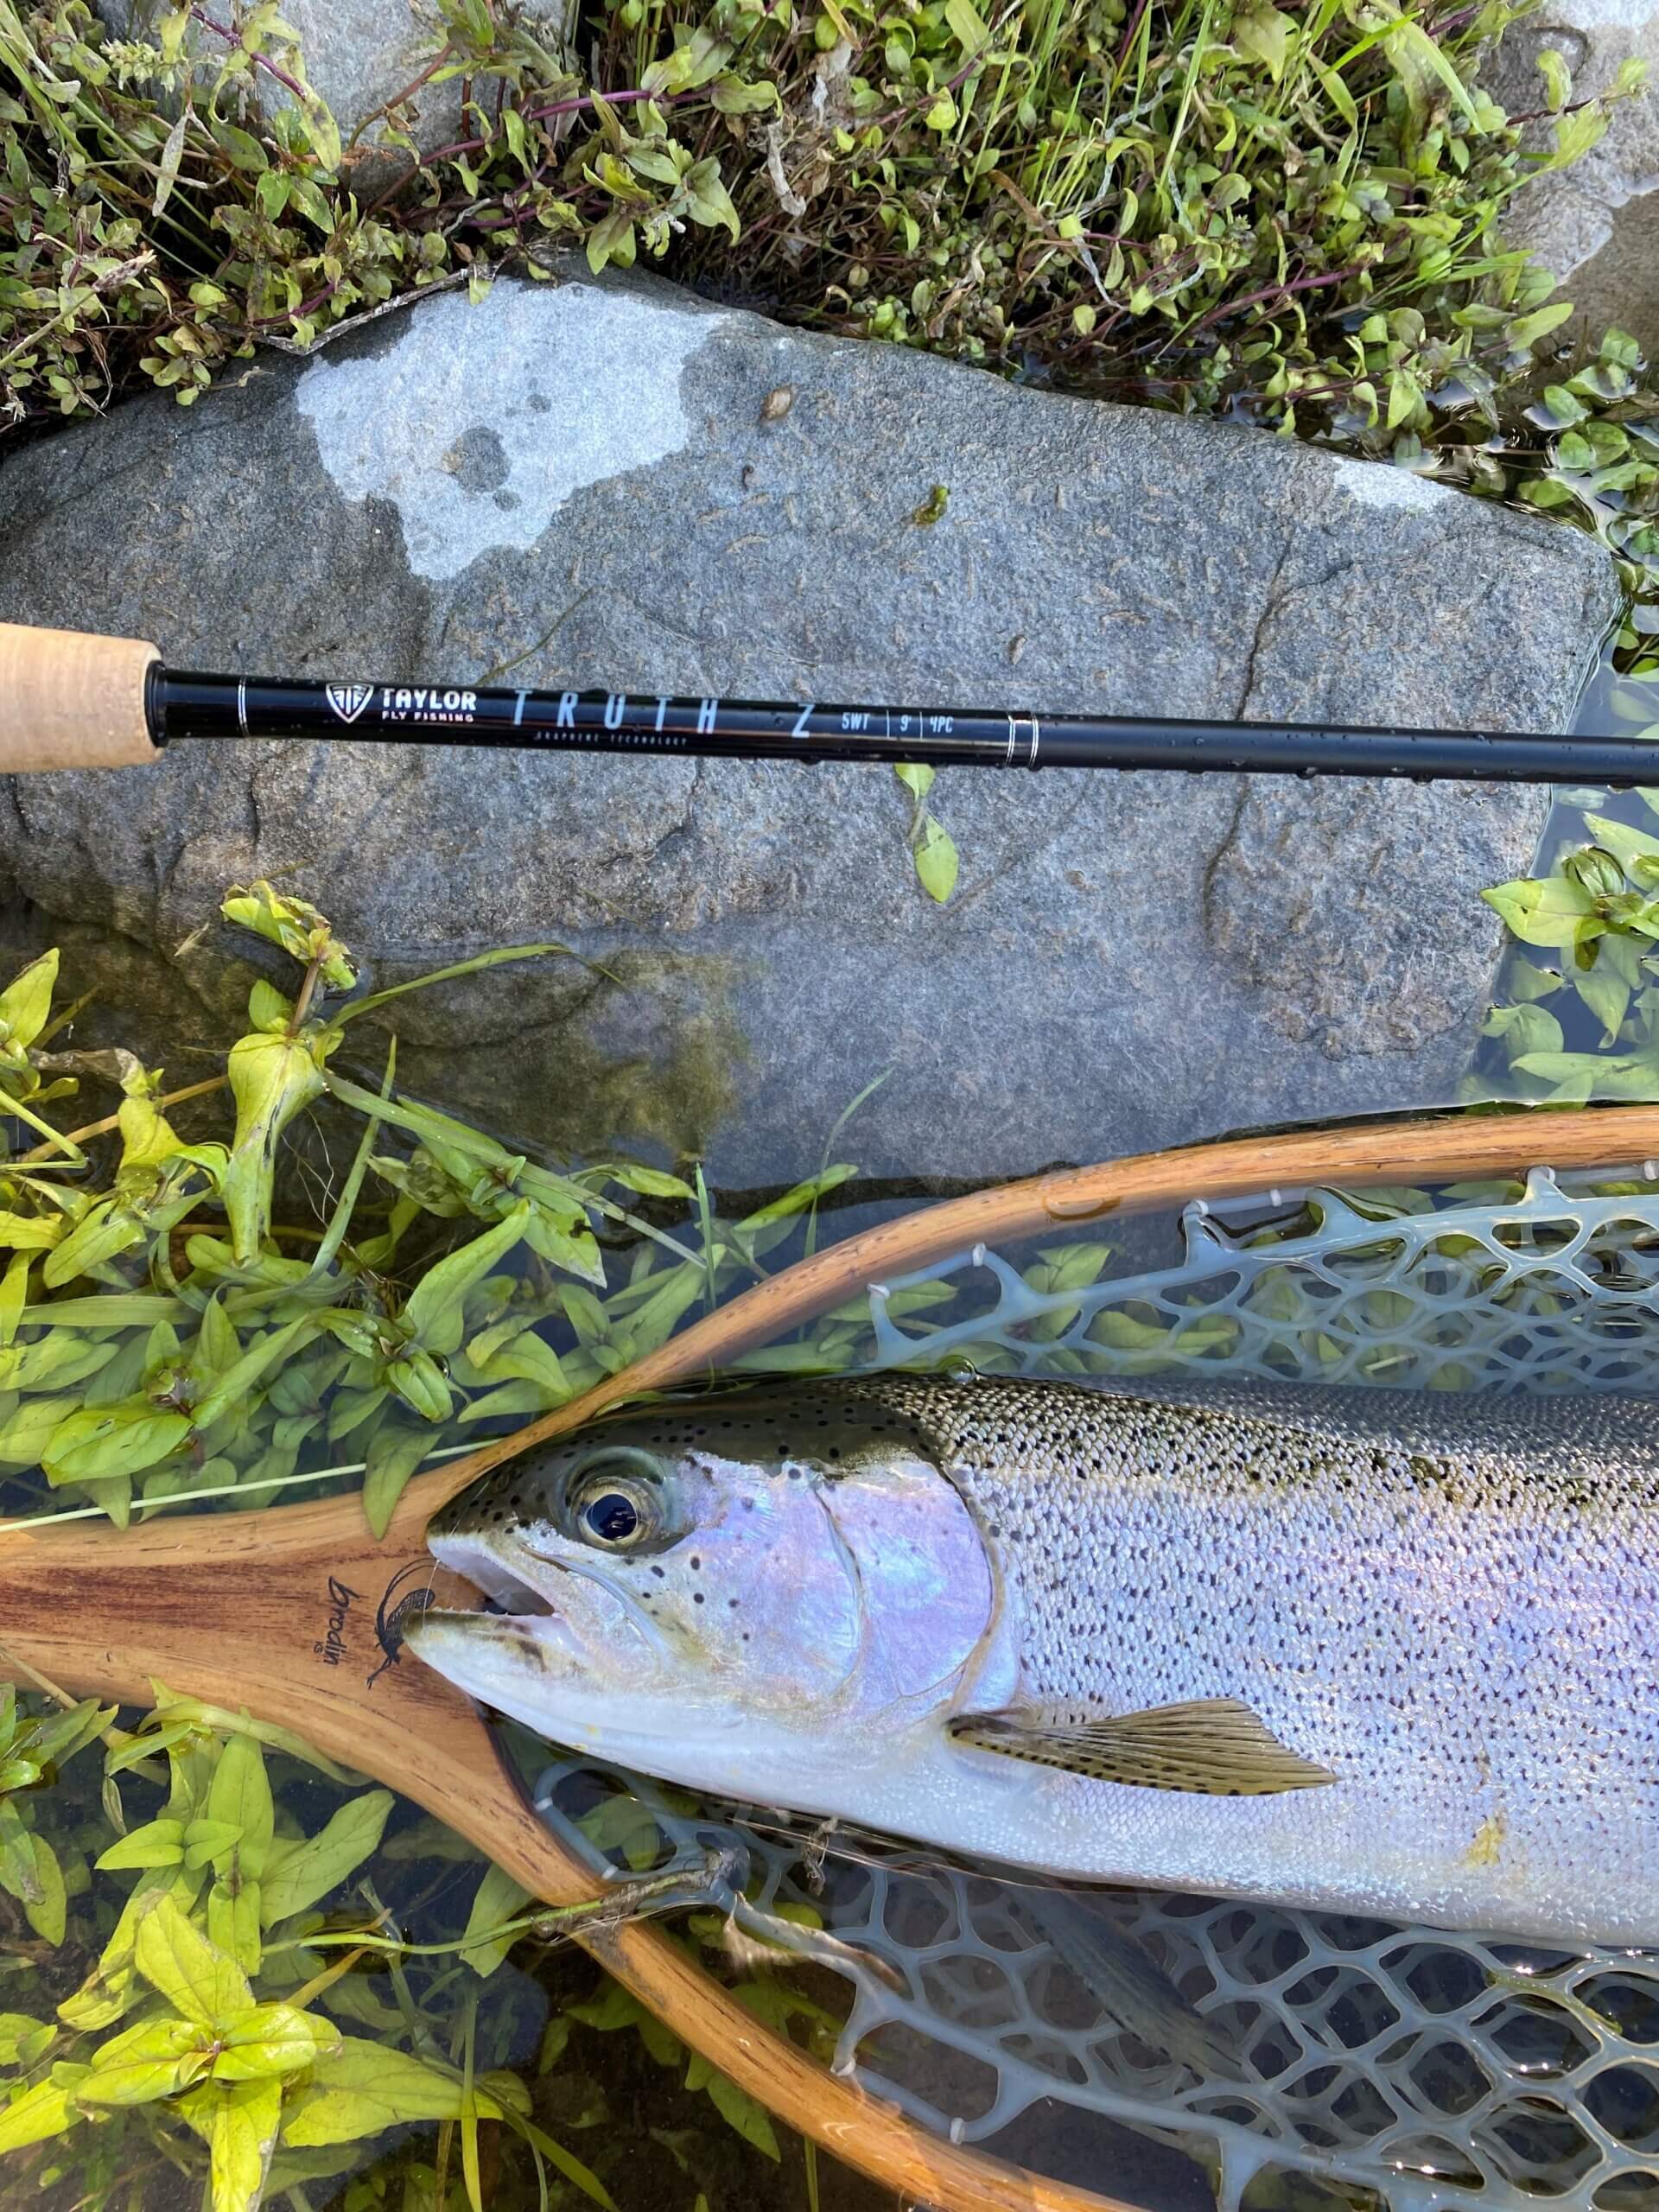 A different kind of fly fishing, Opinion